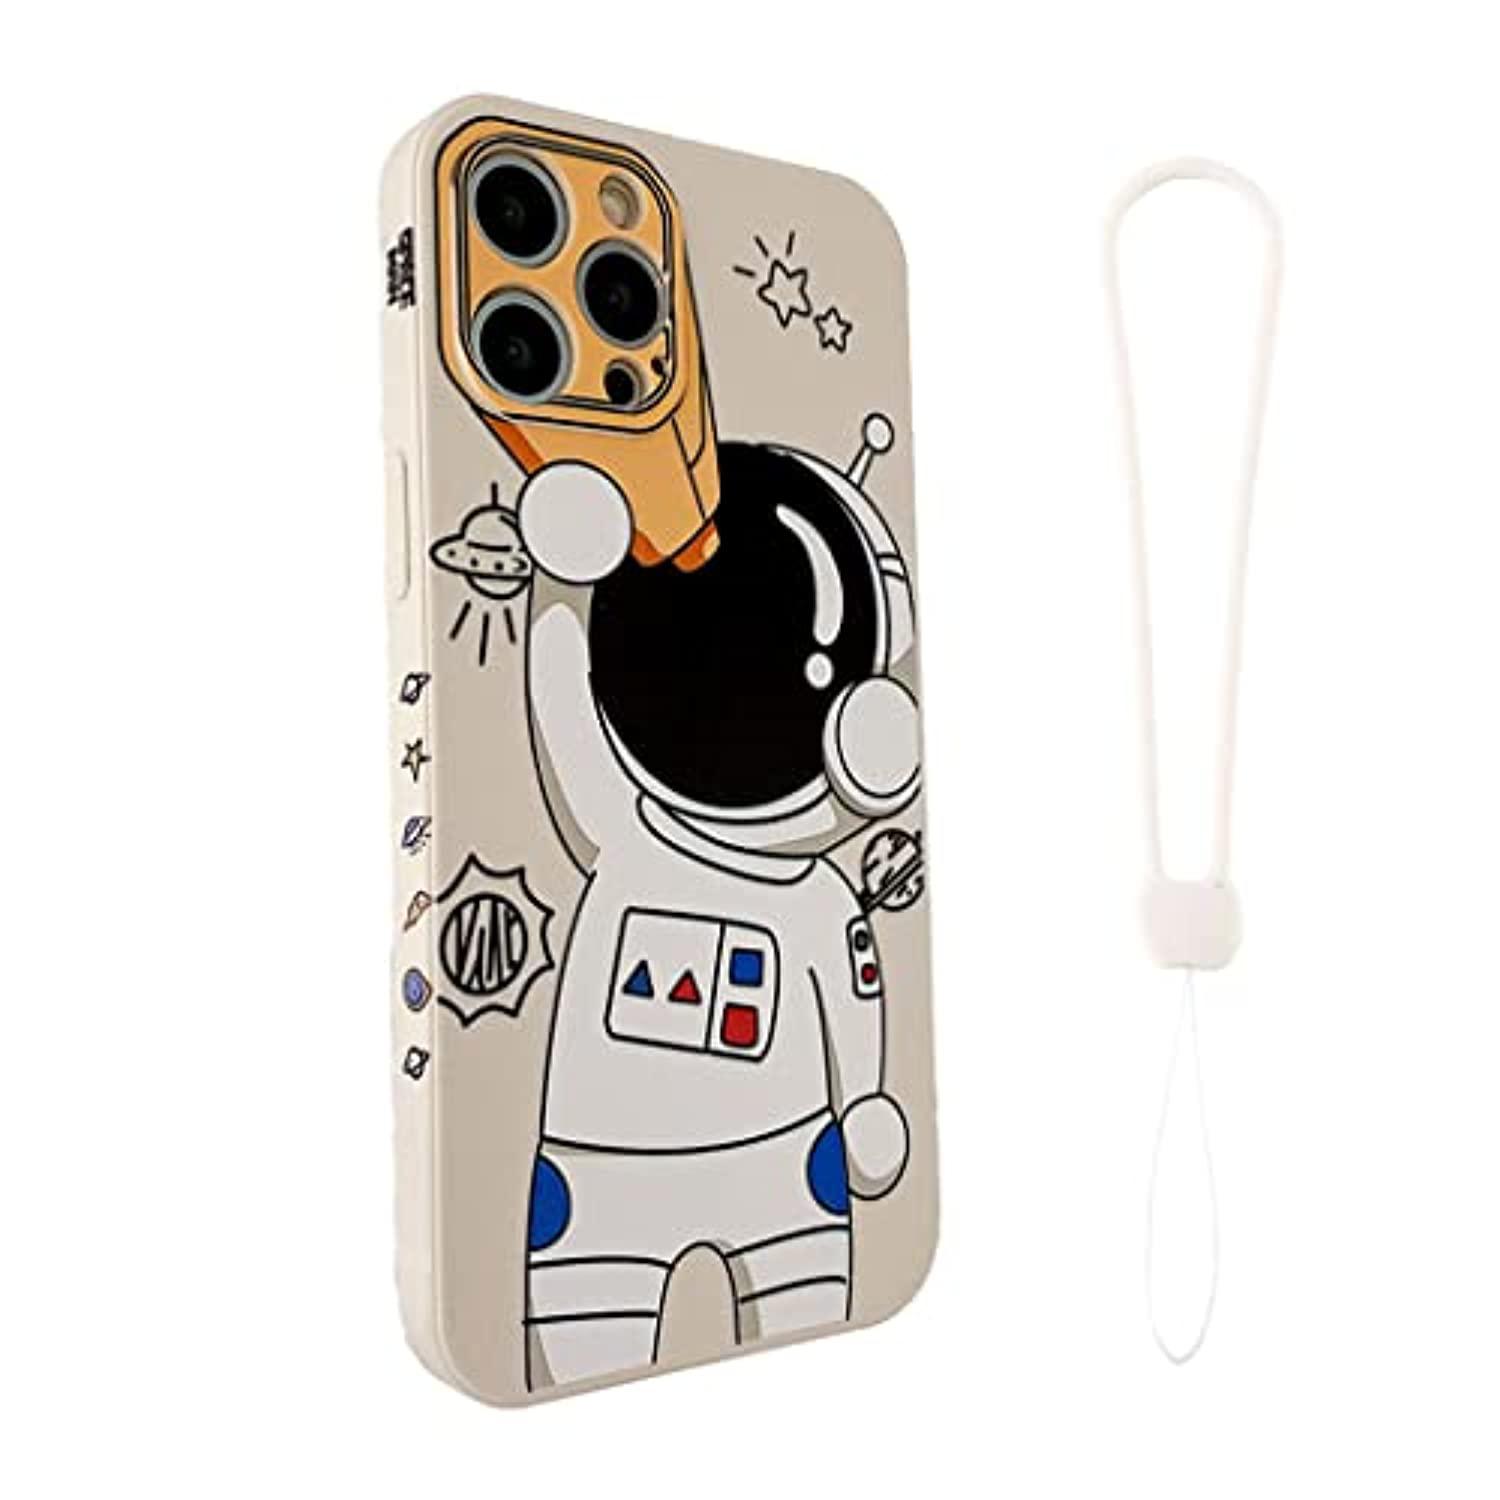 beetag soft silicone case for iphone 12 pro max 6.7 inch with wrist lanyard strap, space astronaut design cartoon graphics bu